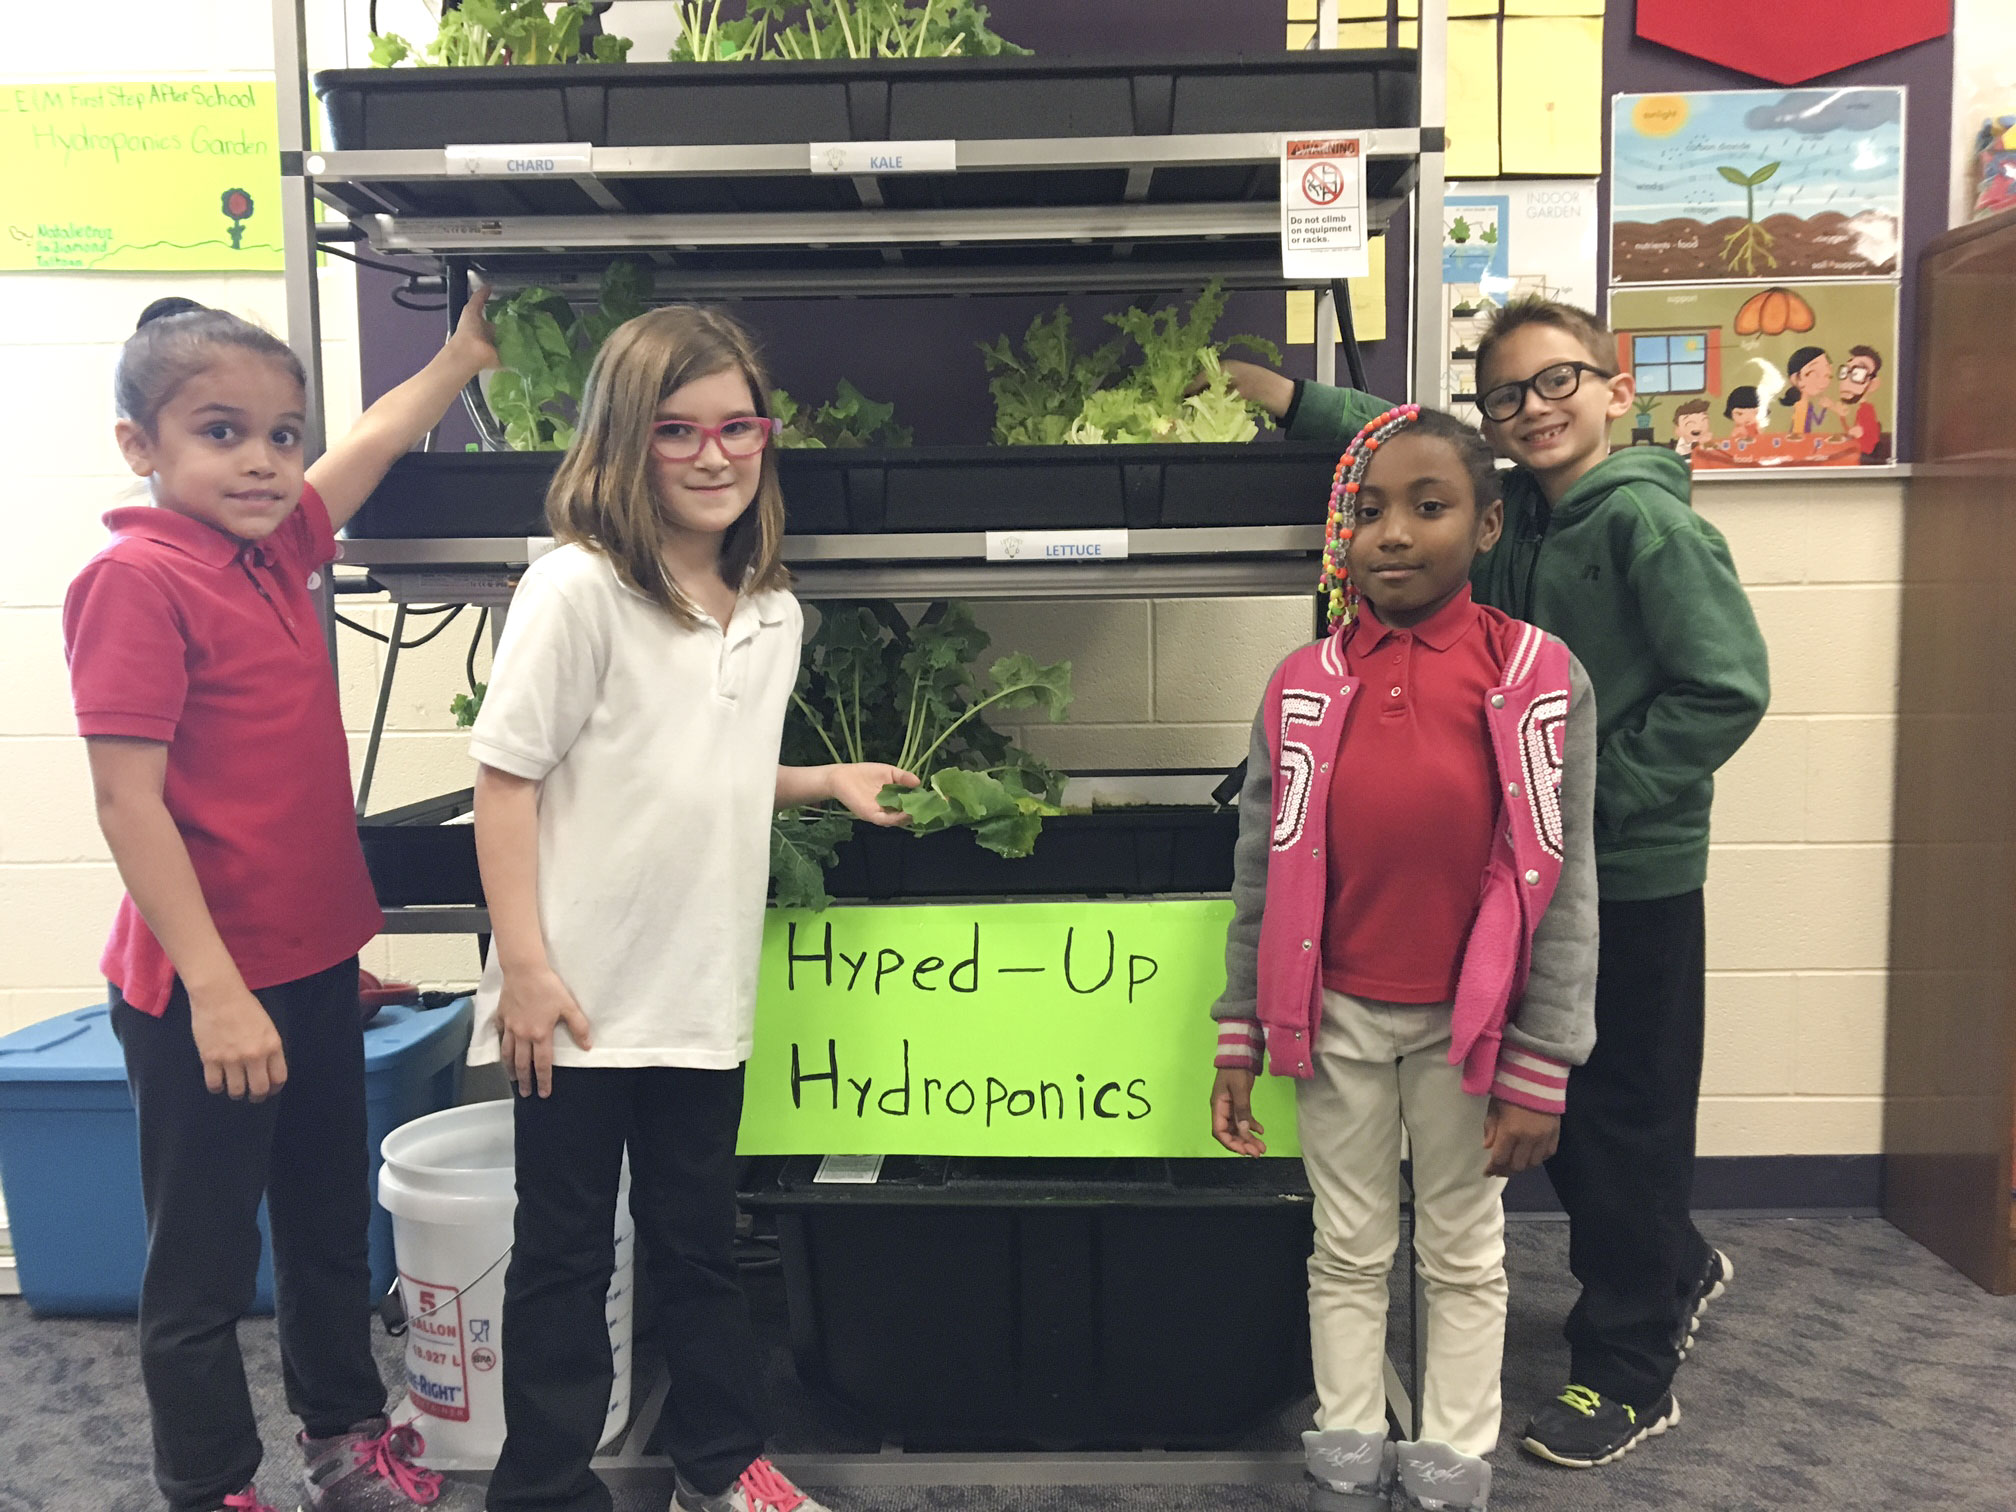 SPECIAL TO THE VINDICATOR
Campbell Elementary Middle School added a hydroponic learning lab as a part of its Youngstown State University After School Program. Students have harvested their plants and have eaten snacks made from the harvest. They harvested lettuce, kale, basil and swiss chard, and made salads and kale chips with the help of cafeteria staff. There were enough vegetables for students and teachers to take some home. Students, from left, are Juliexies Aponte, Emily Snitzer, Aniya Ellis and Vasilios Krinos.